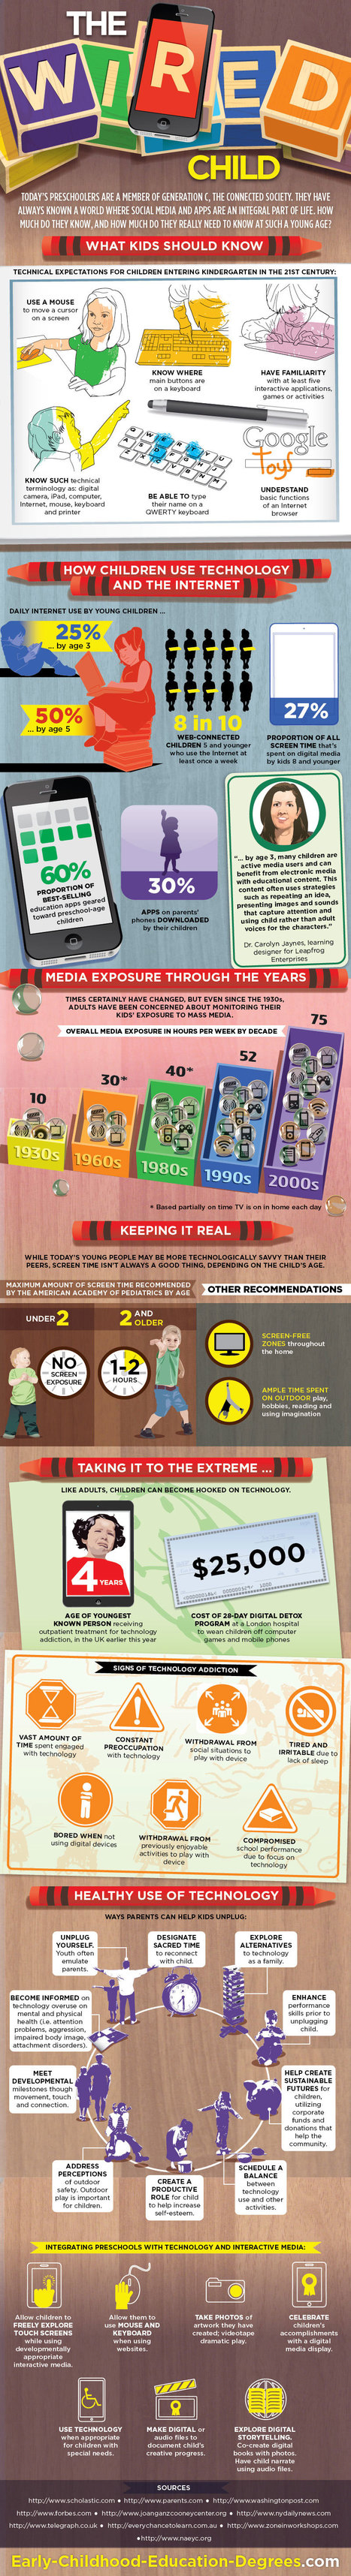 The Complete Visual Guide To Technology For Children [Infographic] | Latest Social Media News | Scoop.it